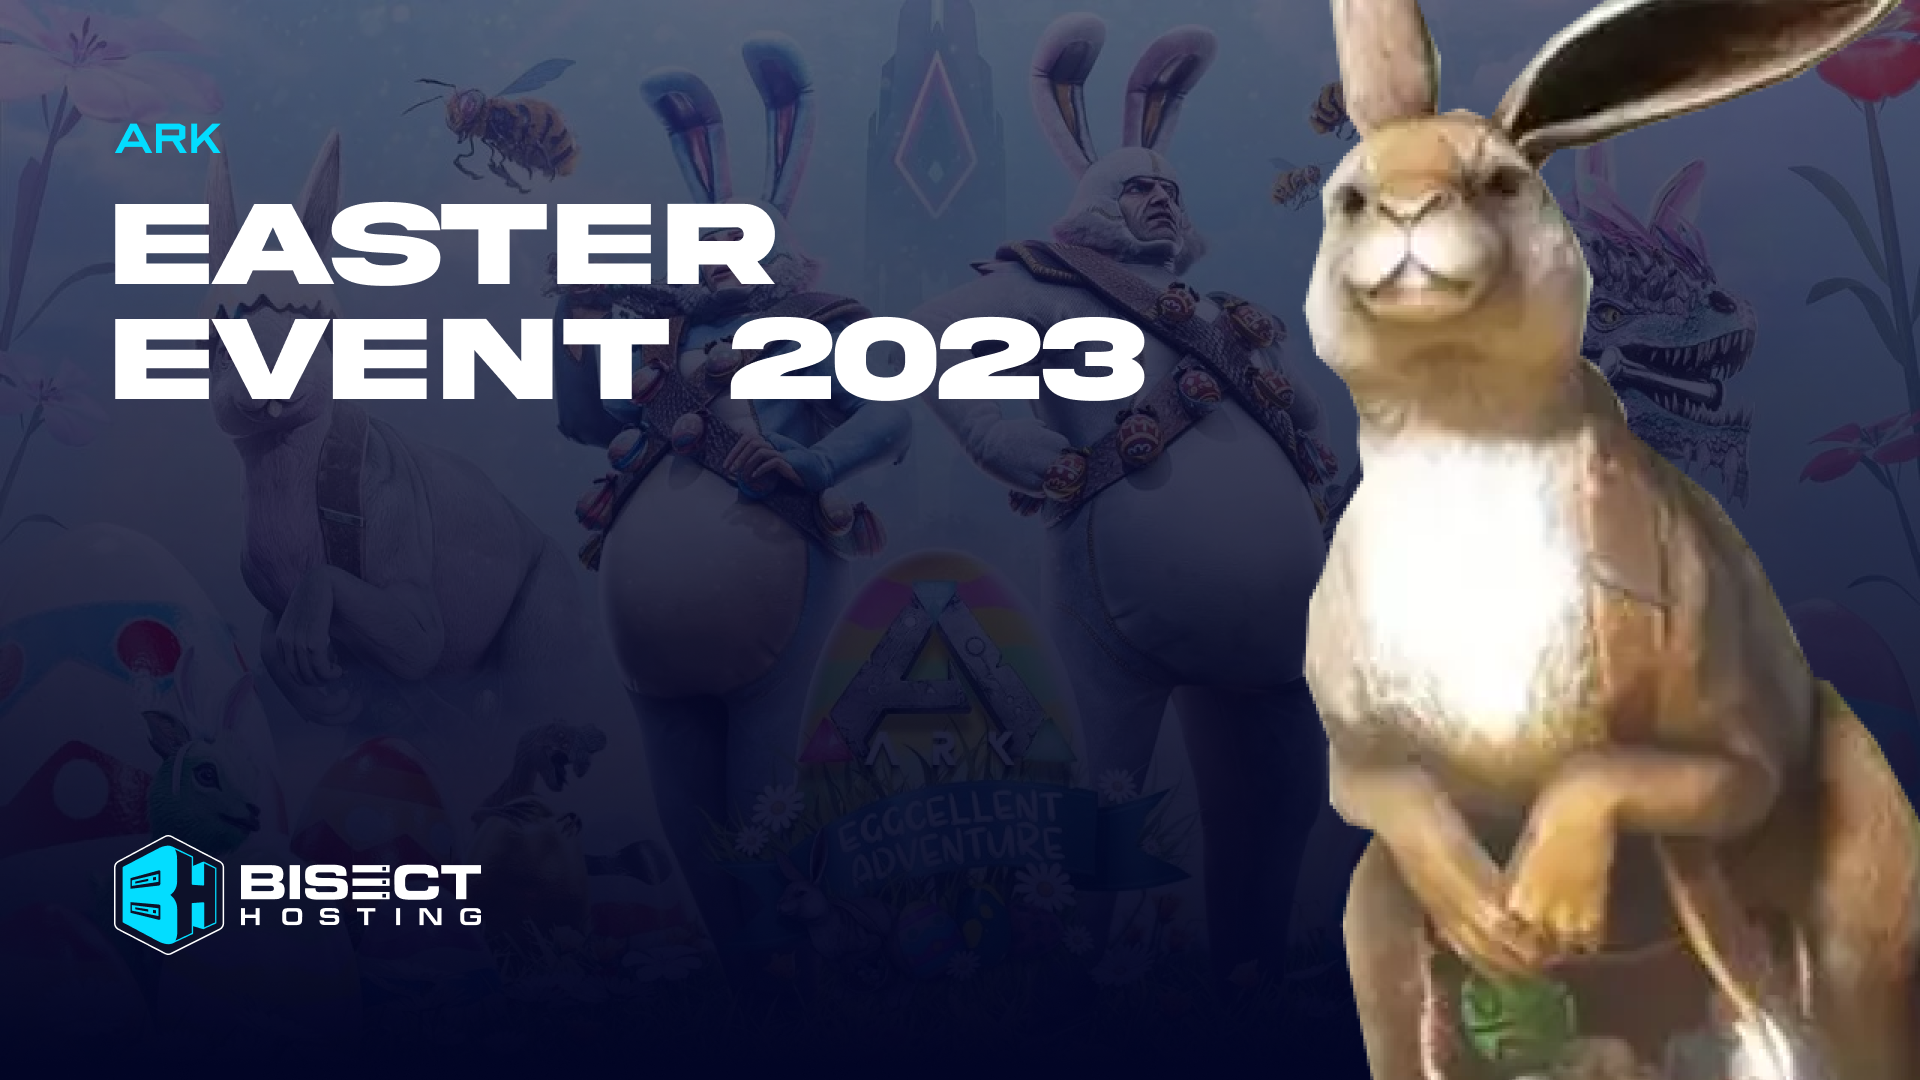 ARK Eggcellent Adventure Event 2023: Start Time Speculation, Features and  More - GINX TV